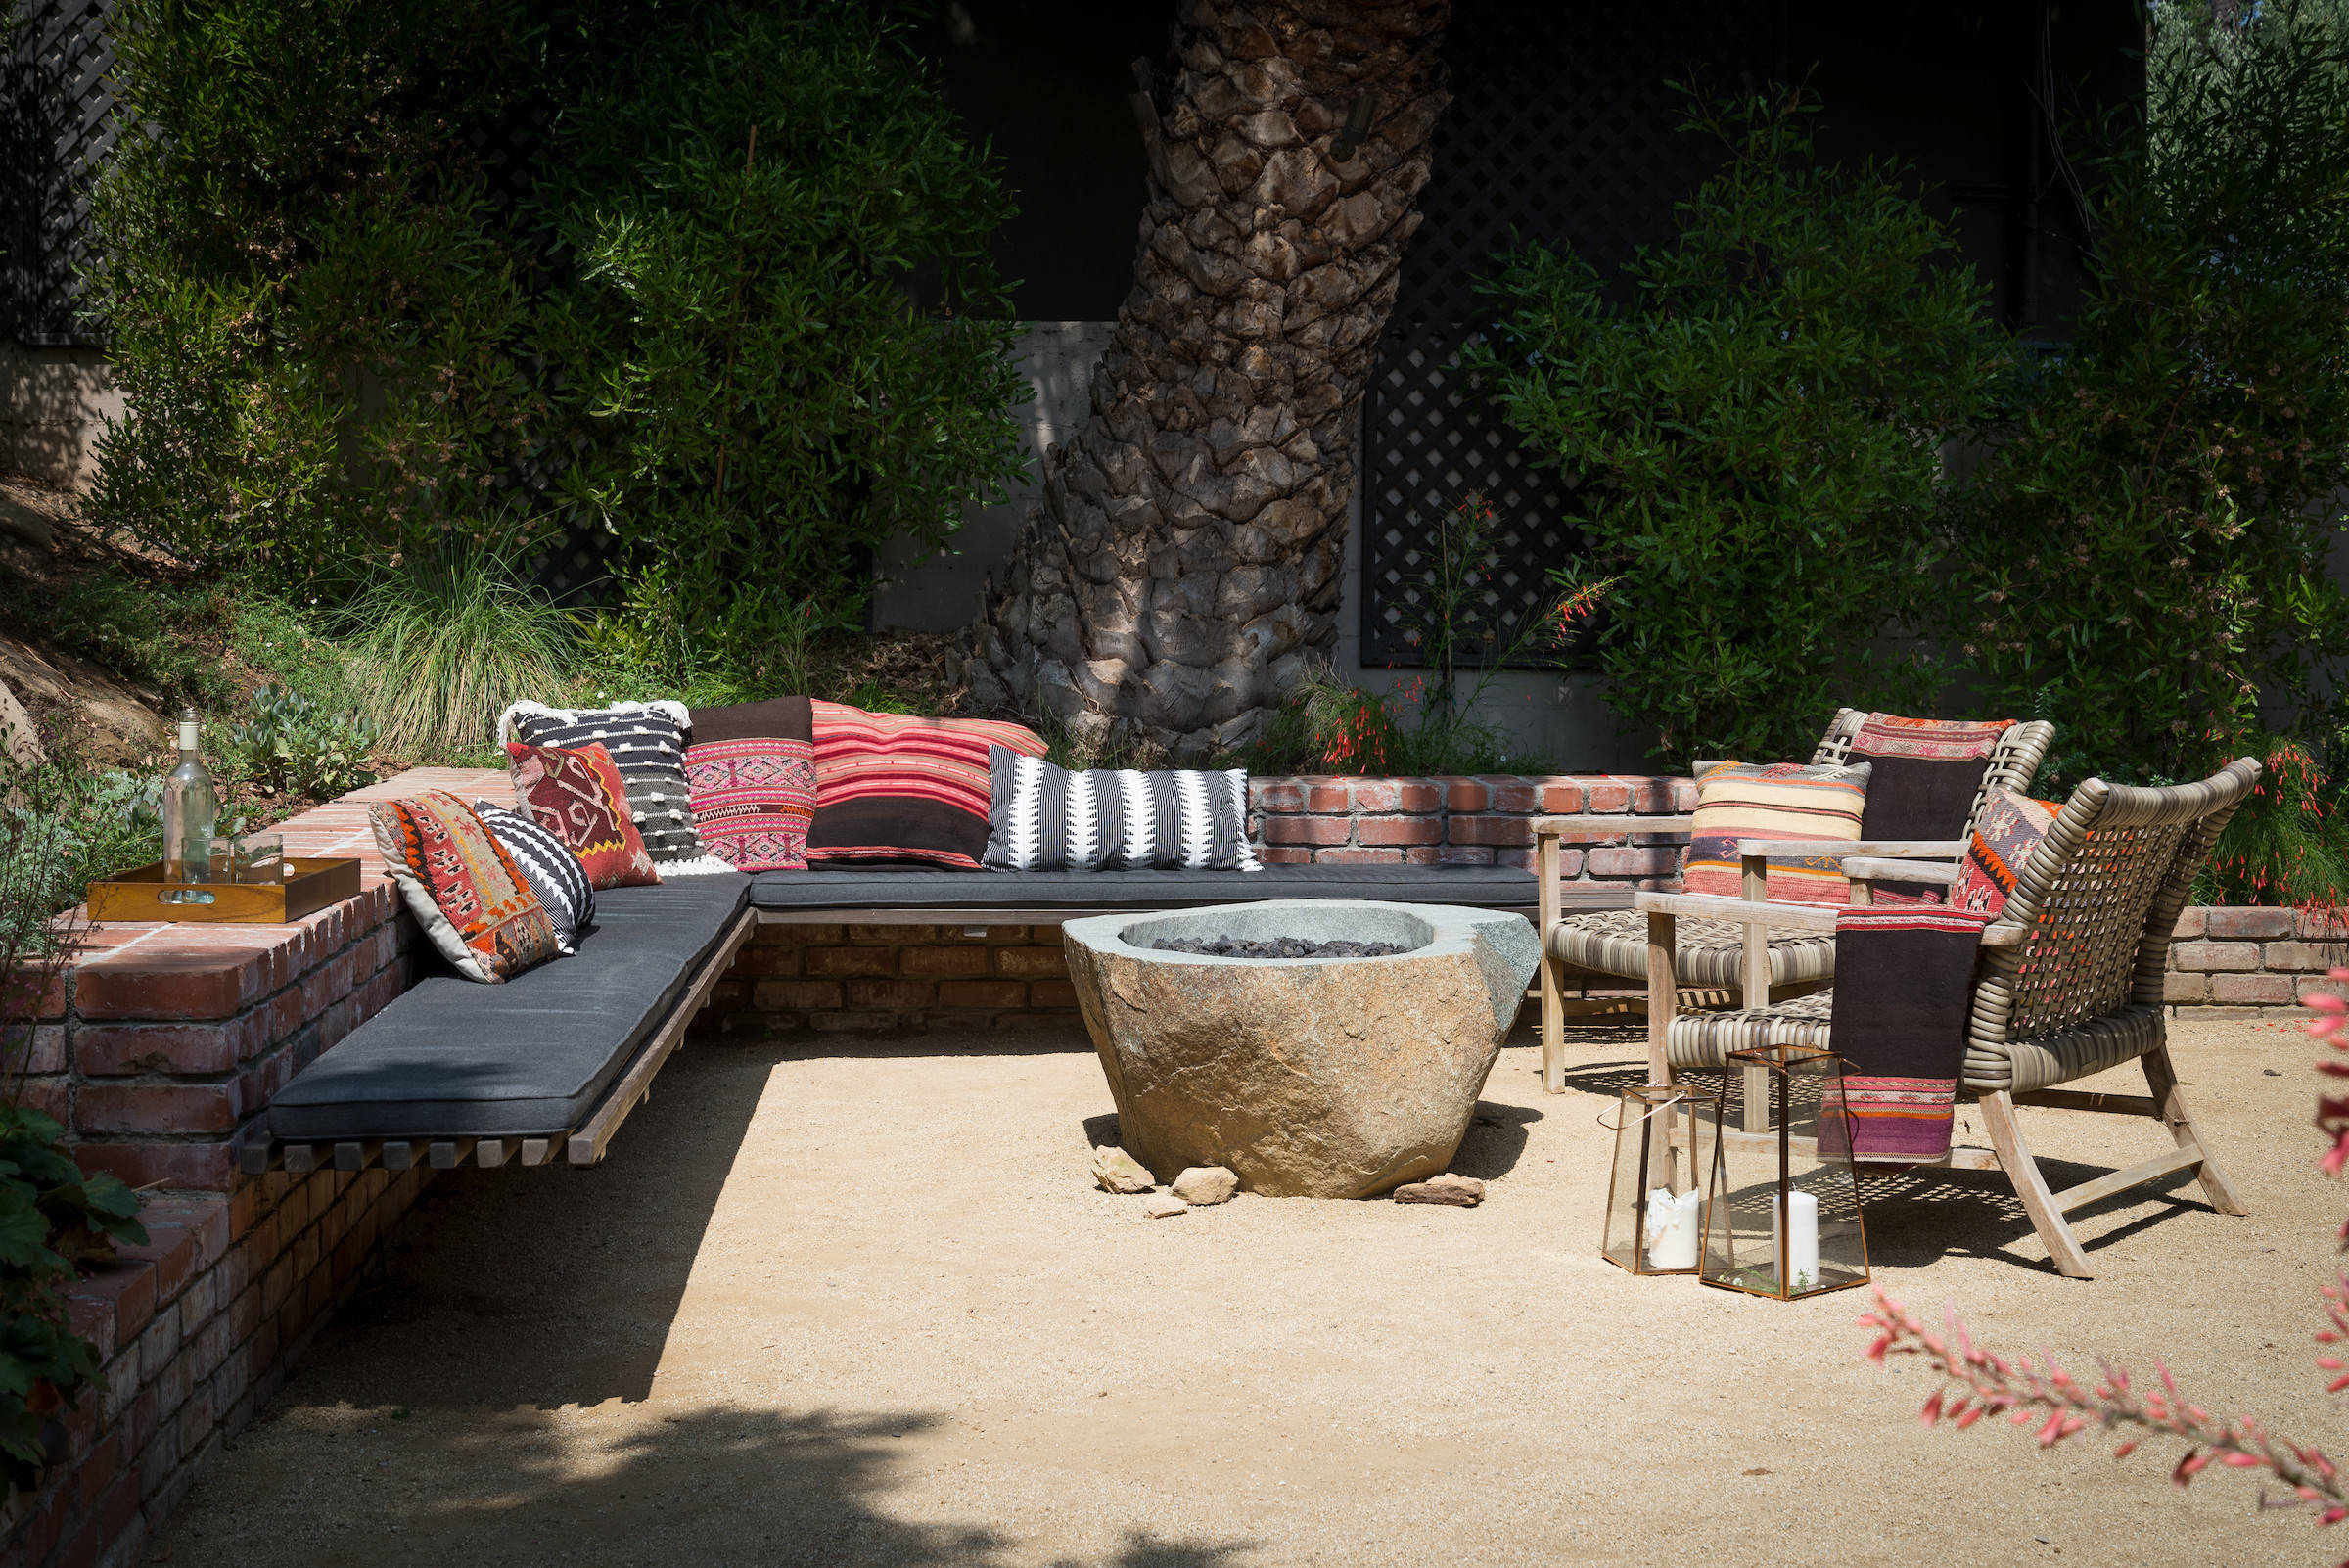 75 Beautiful Fire Pit Seating Home Design Ideas & Designs | Houzz Au